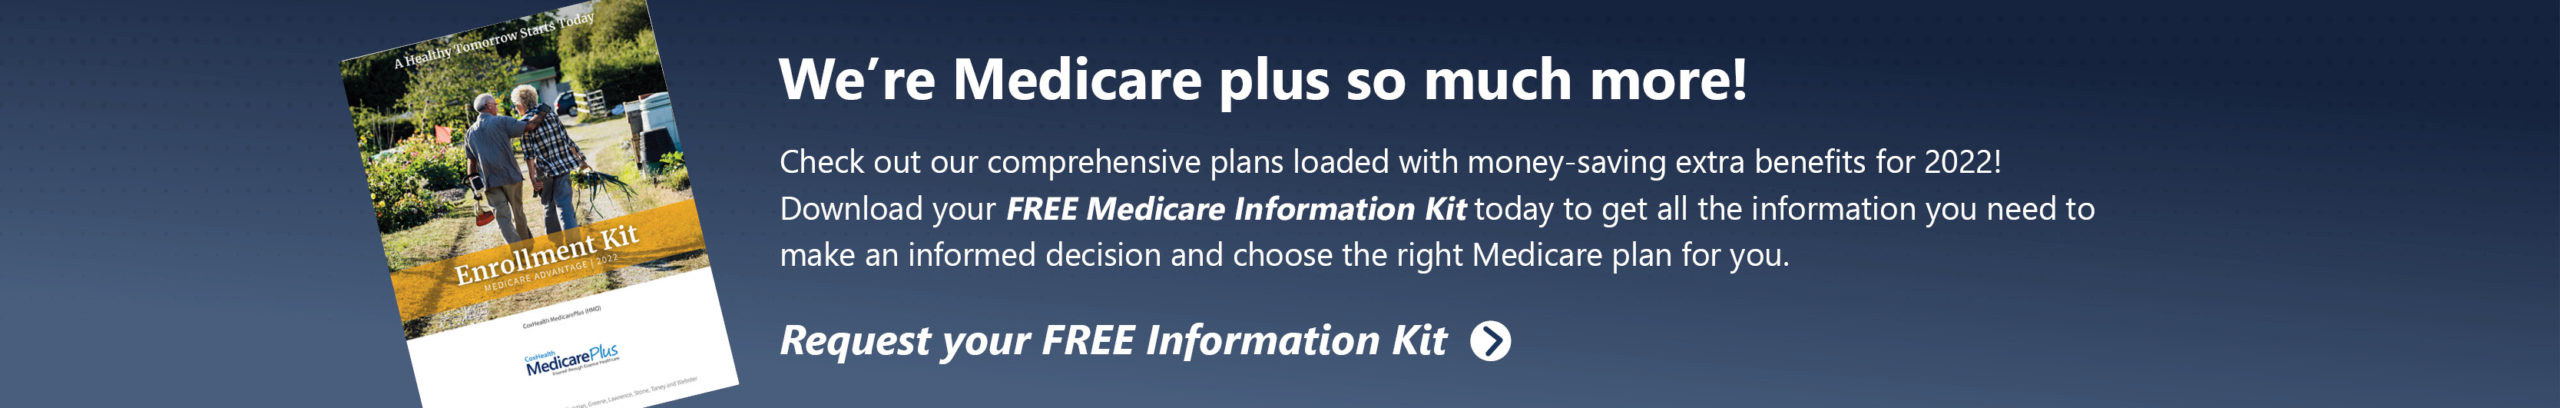 We're Medicare plus so much more!